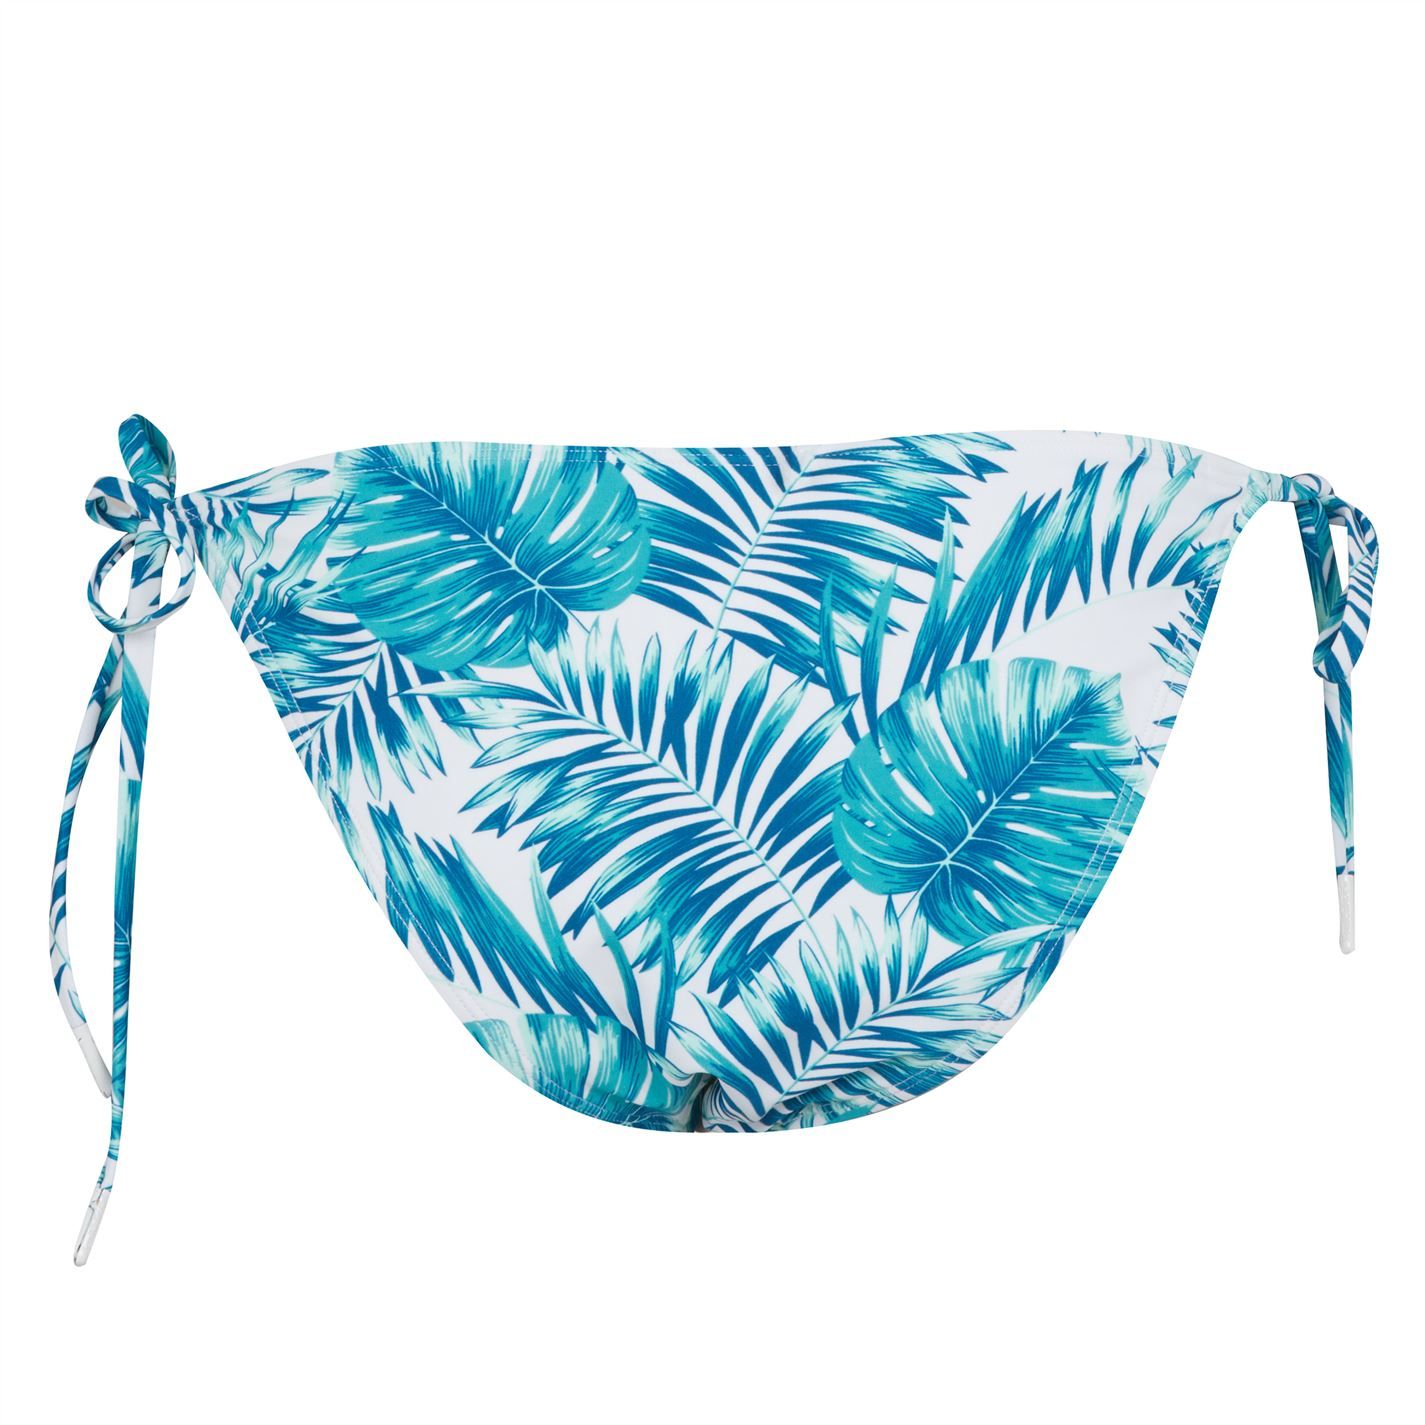 Rock the beach or the pool this summer with these bikini bottoms by SoulCal. These bottoms have been given a drawstring to give you a perfect snug fit, making you feel comfortable and confident all day long. - See the SoulCal Tie Bikini Top for the perfect matching counterpart. - Materials: - - > 88% Polyester, 12% Elastane